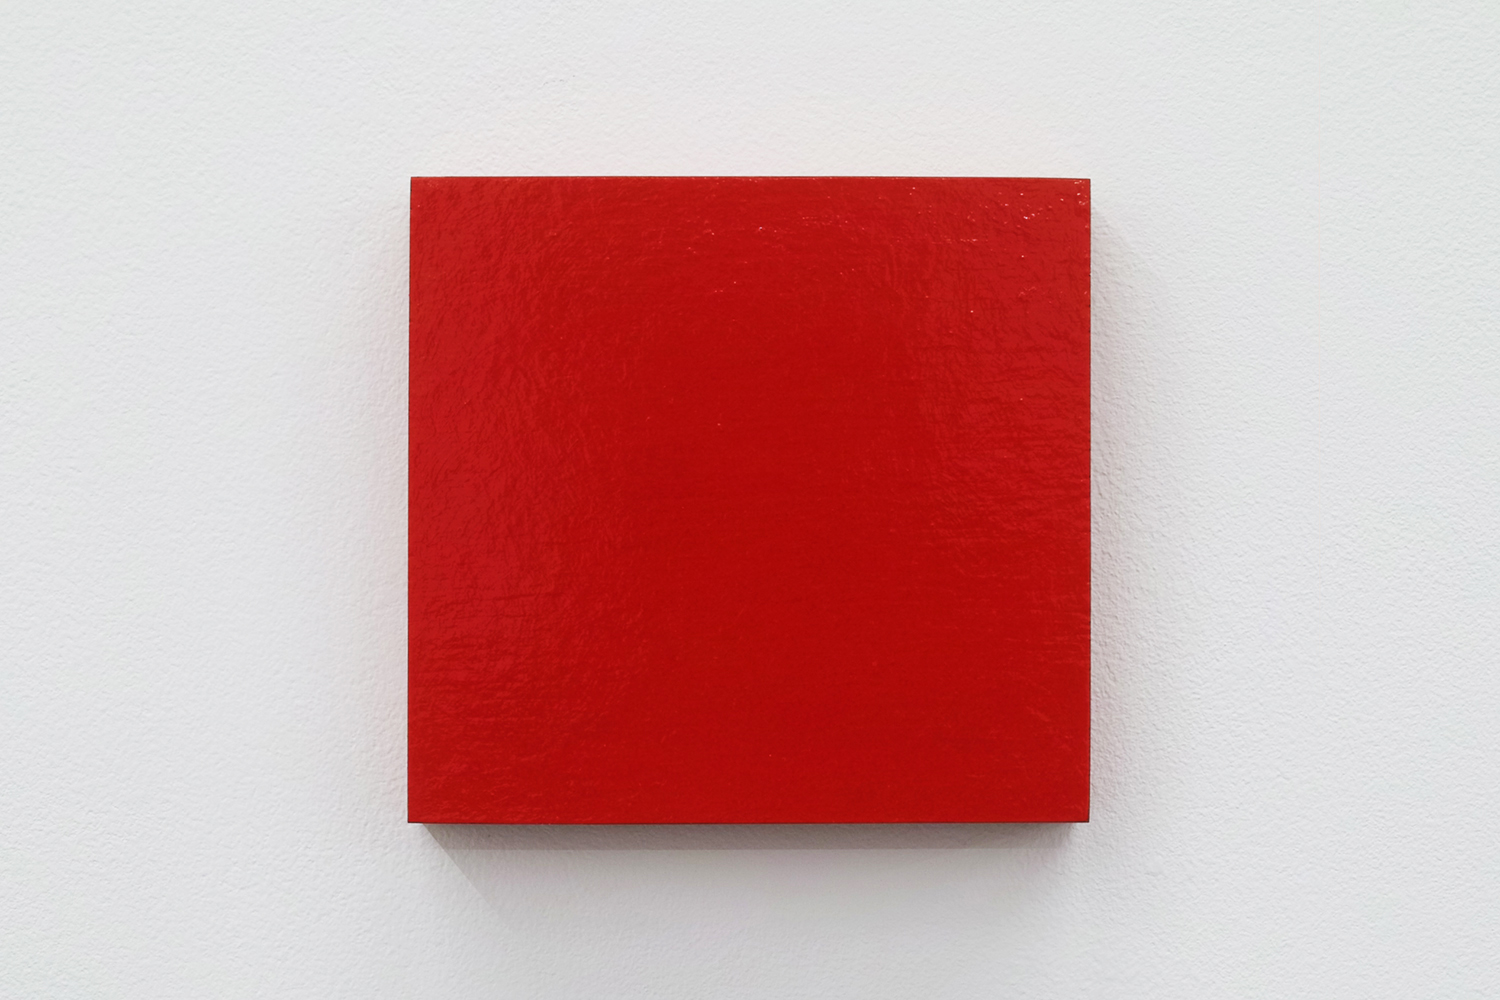 Text No. 265 (untitled red)<br>acrylic on plywood,  100 x 106 x 18 mm,  2002